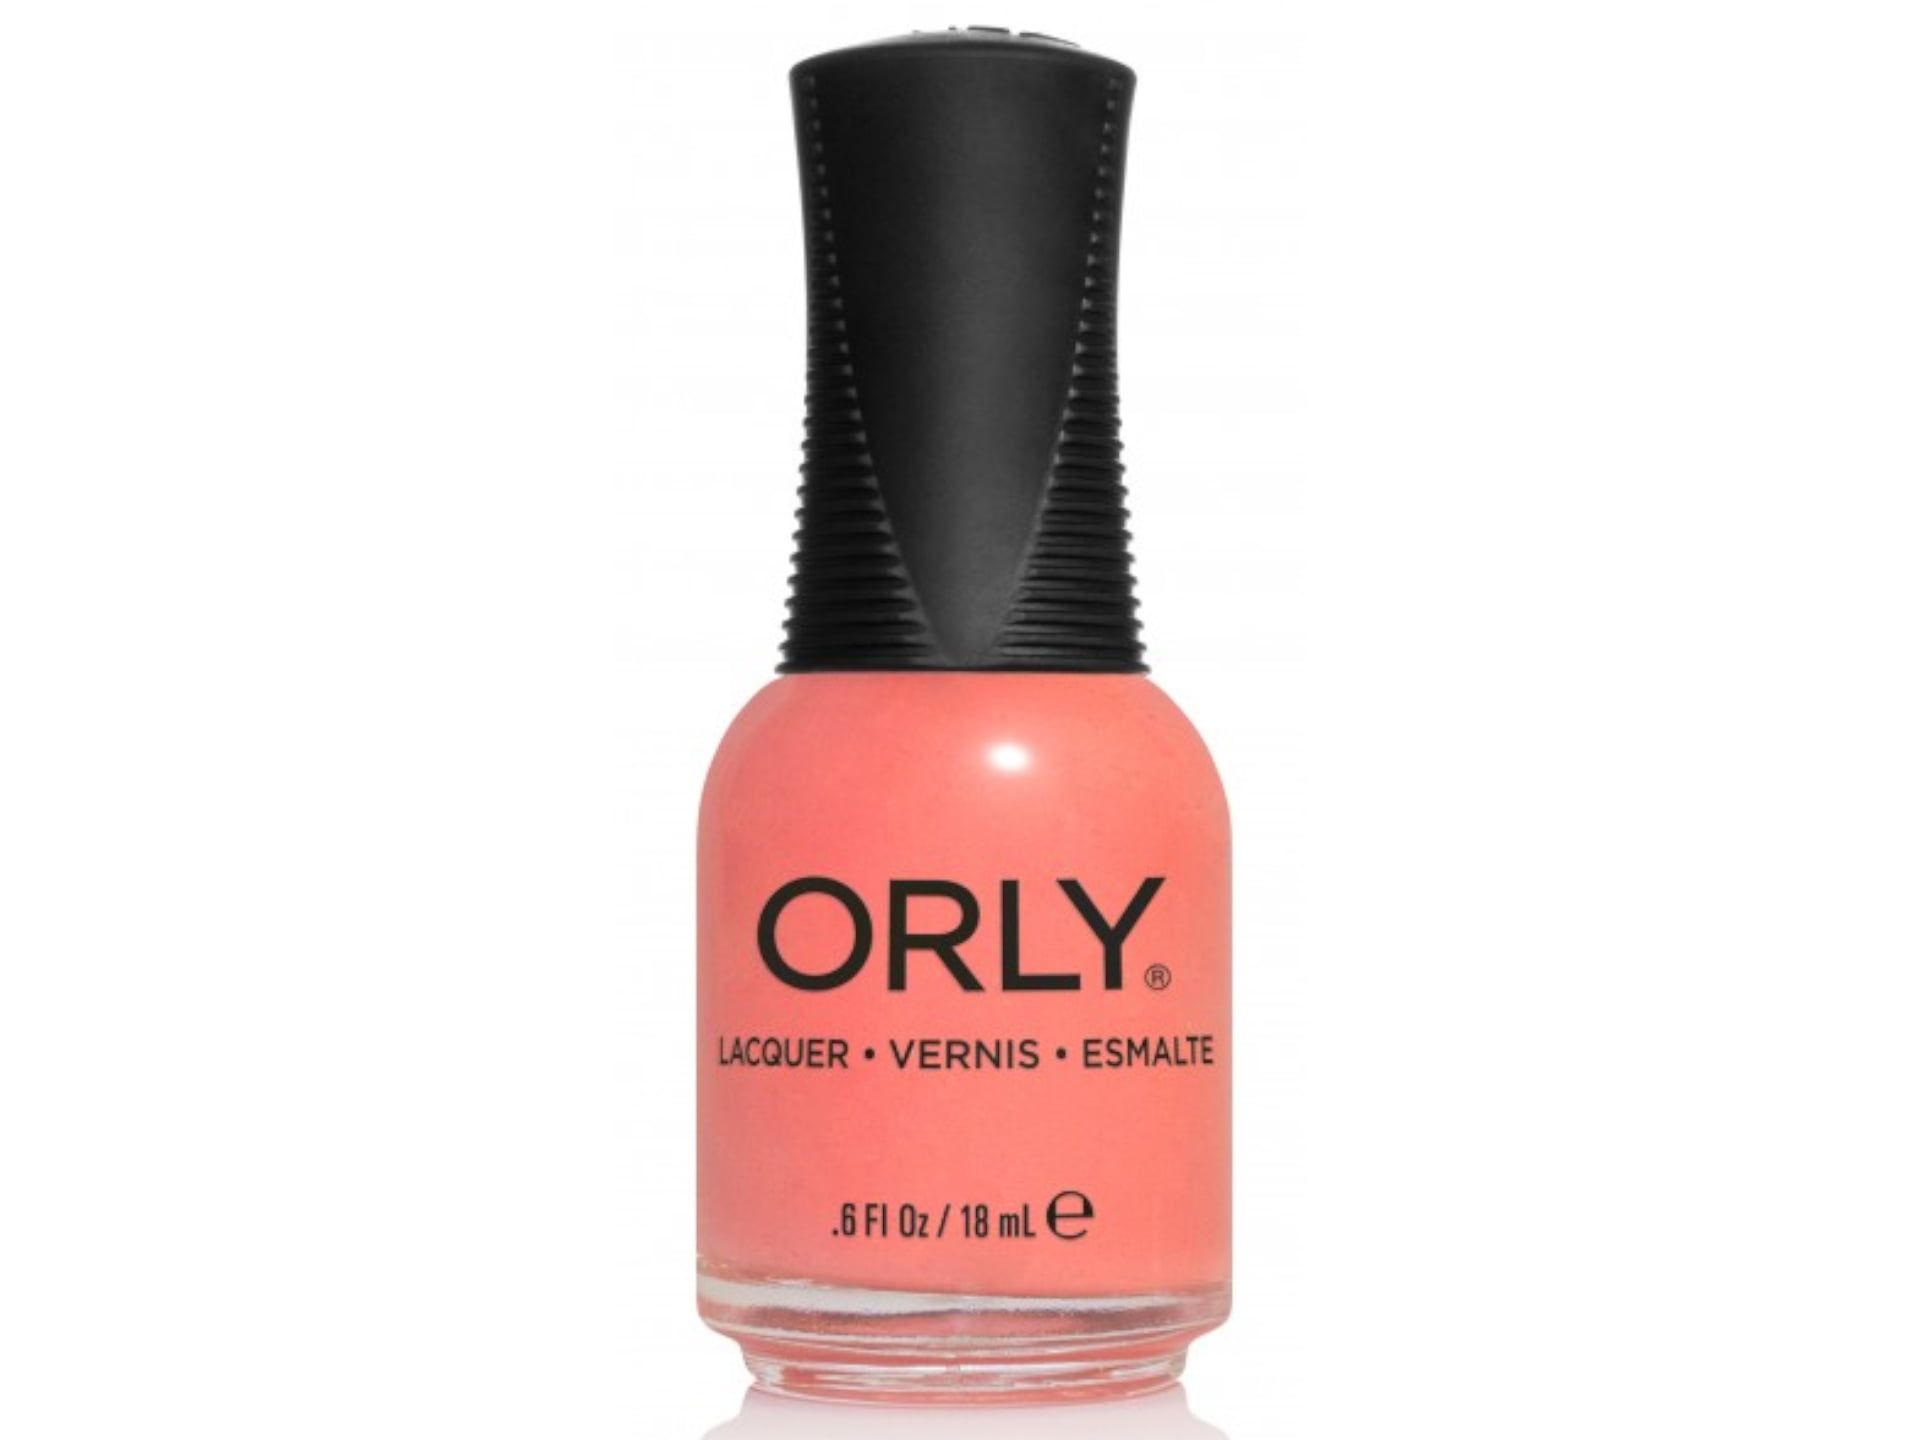 Orly Nagellack (Positive Coral-Ation)